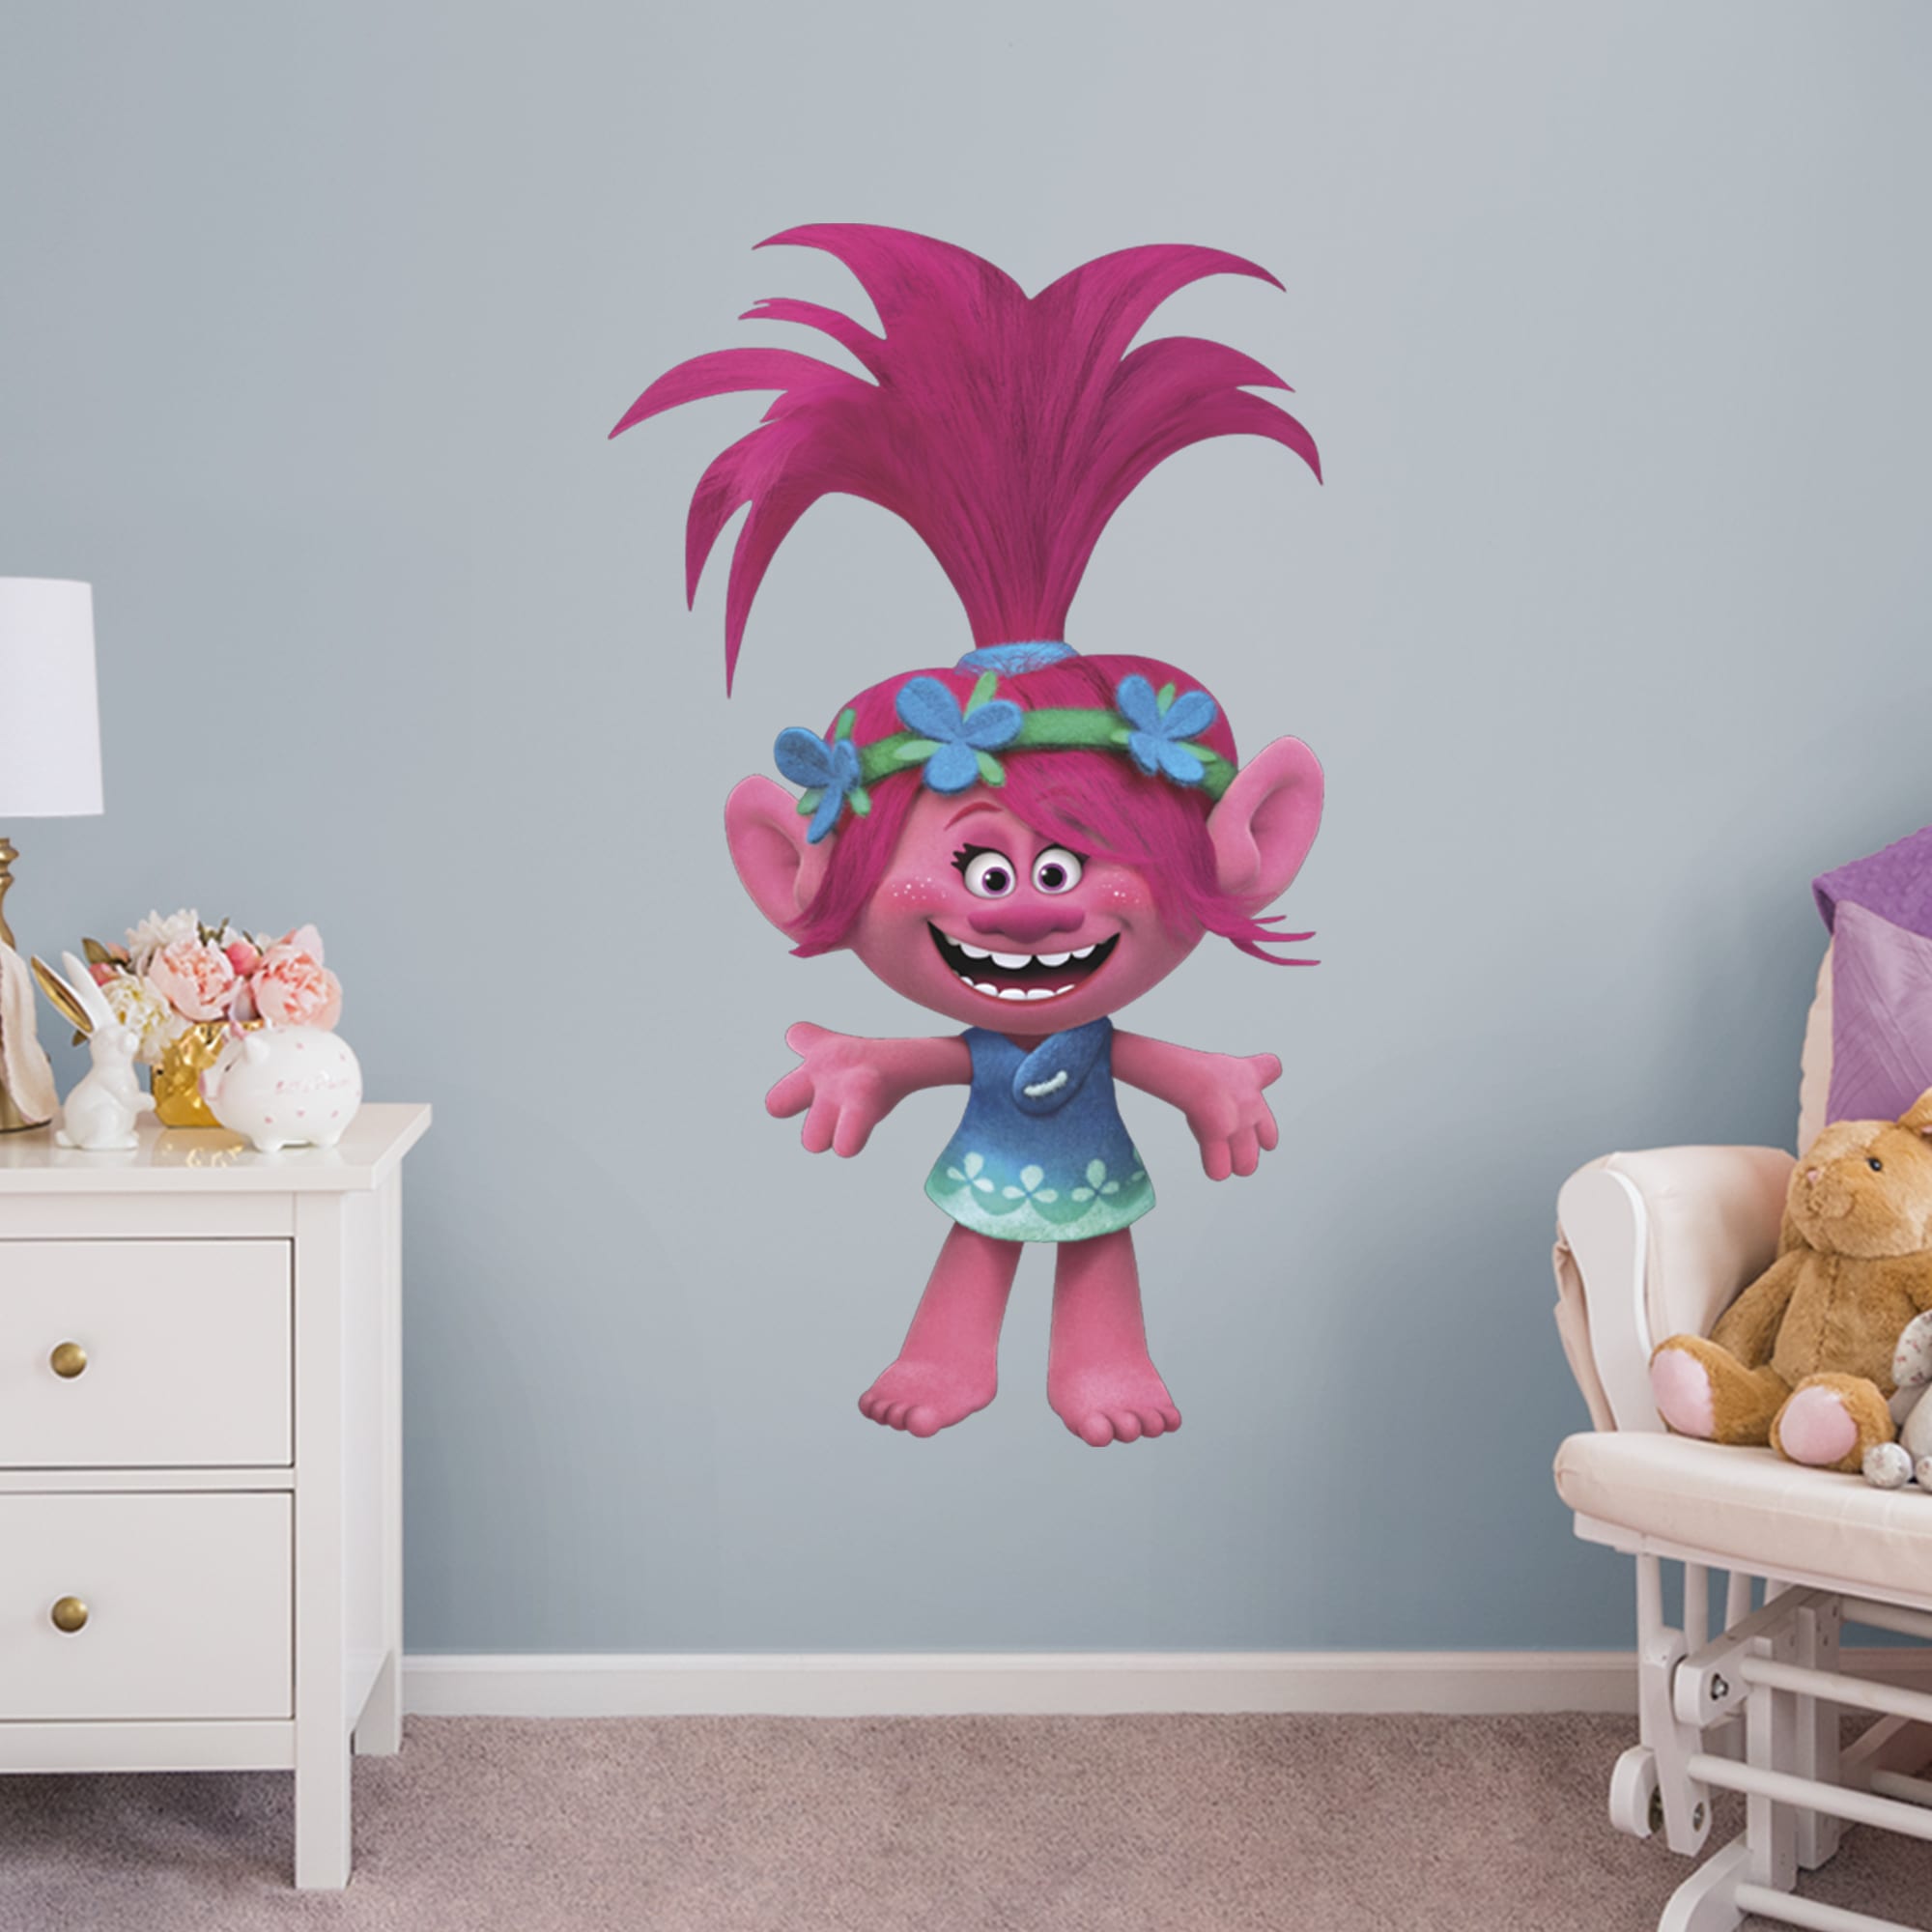 Poppy - Officially Licensed Trolls Removable Wall Decal Giant Character + 2 Decals (30"W x 51"H) by Fathead | Vinyl